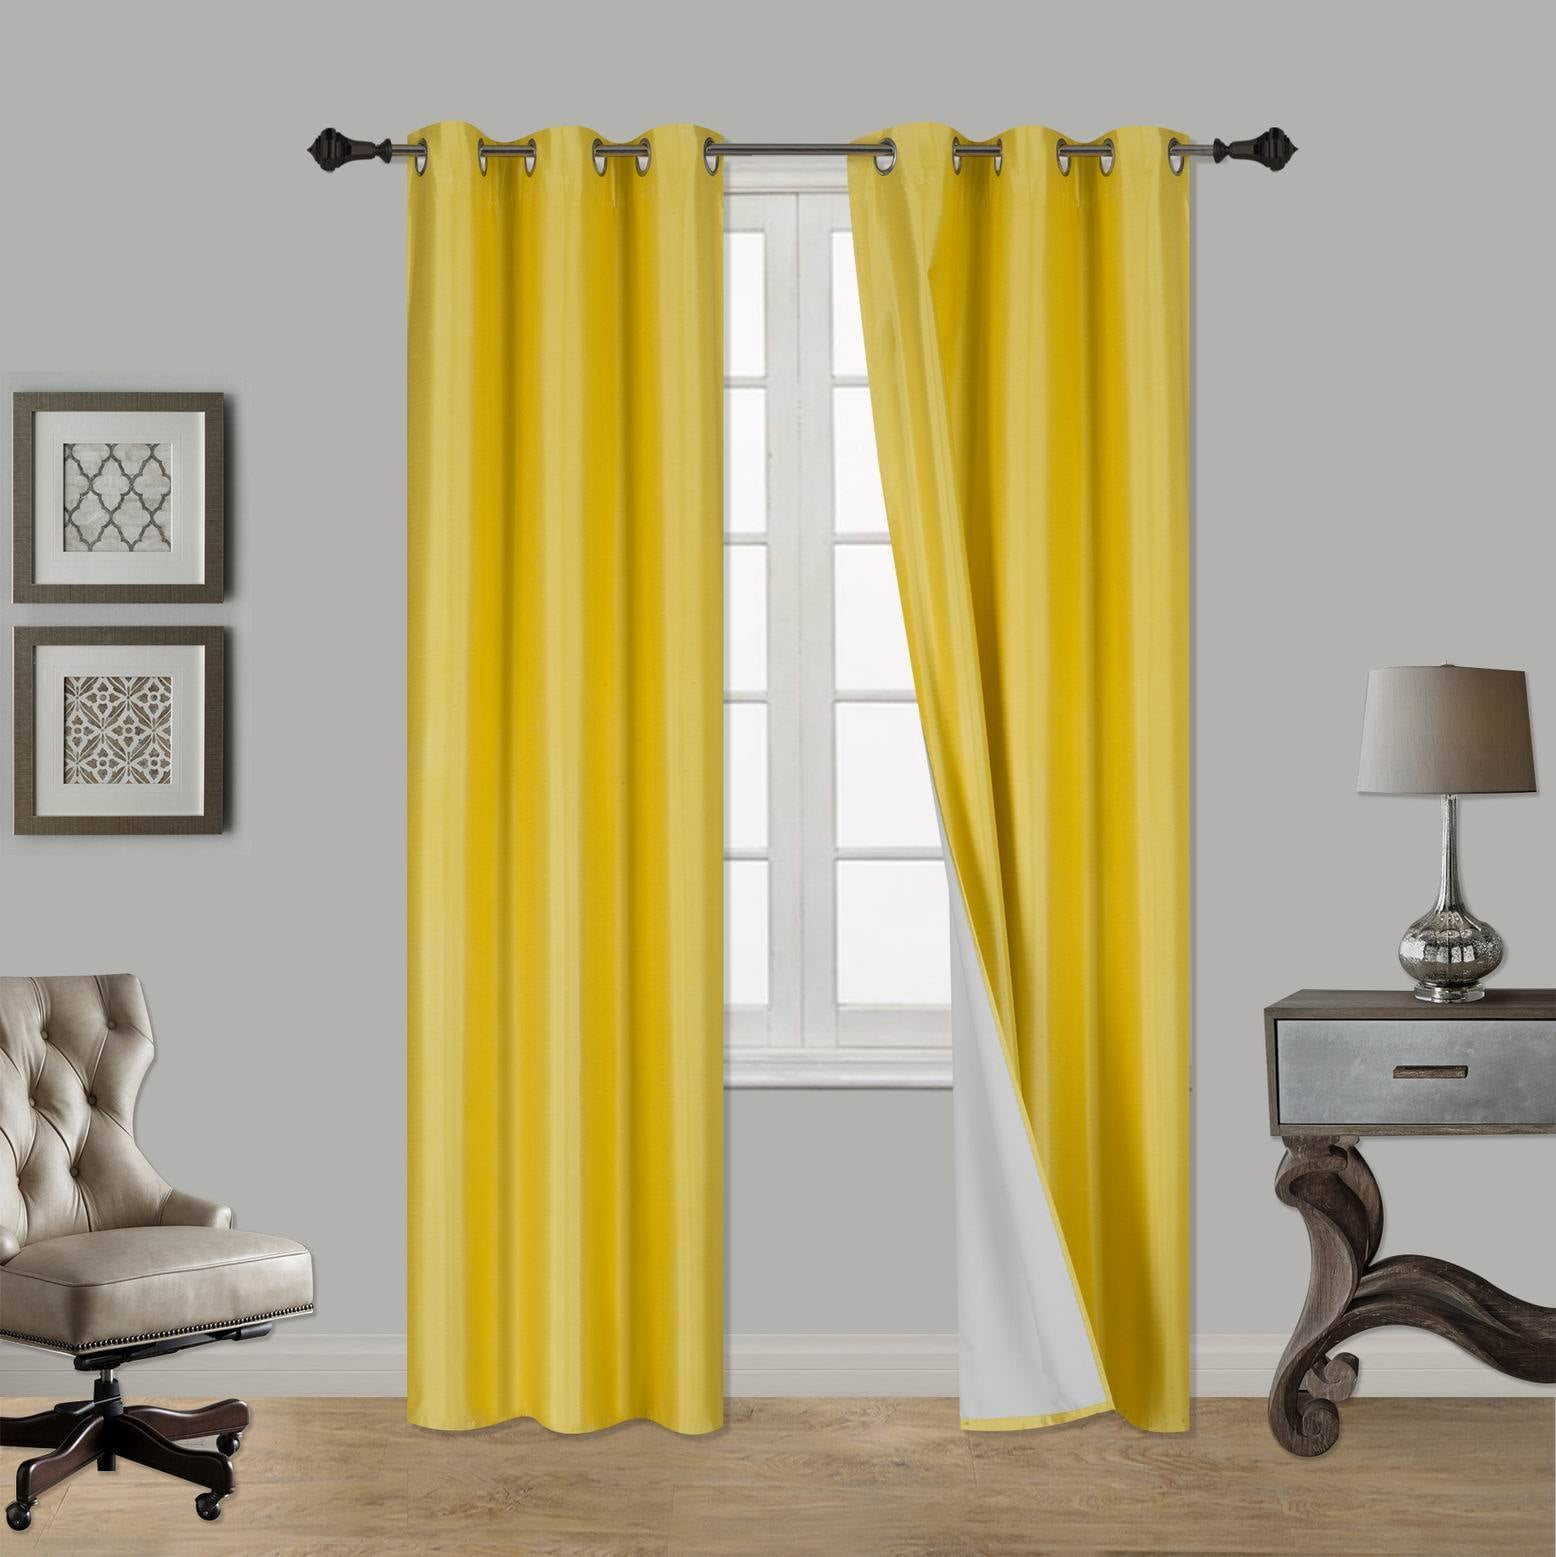 Silver Grommets Panel 100% Blackout 3 Layered Window Curtain 1 Set Yellow 